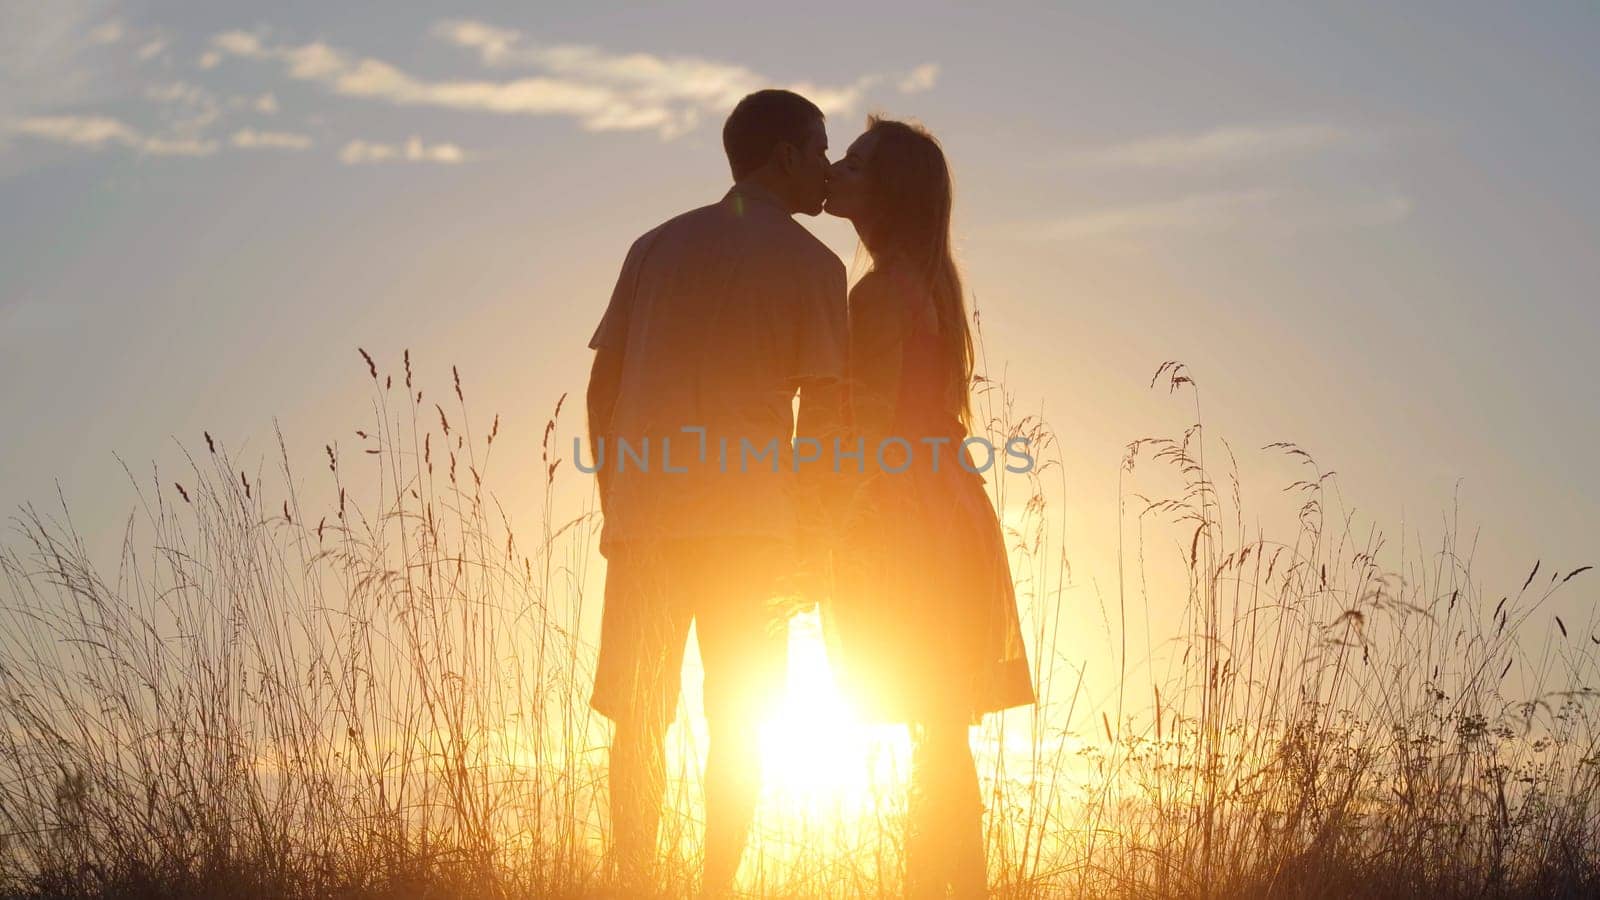 Silhouettes of happy lovers kissing at sunset